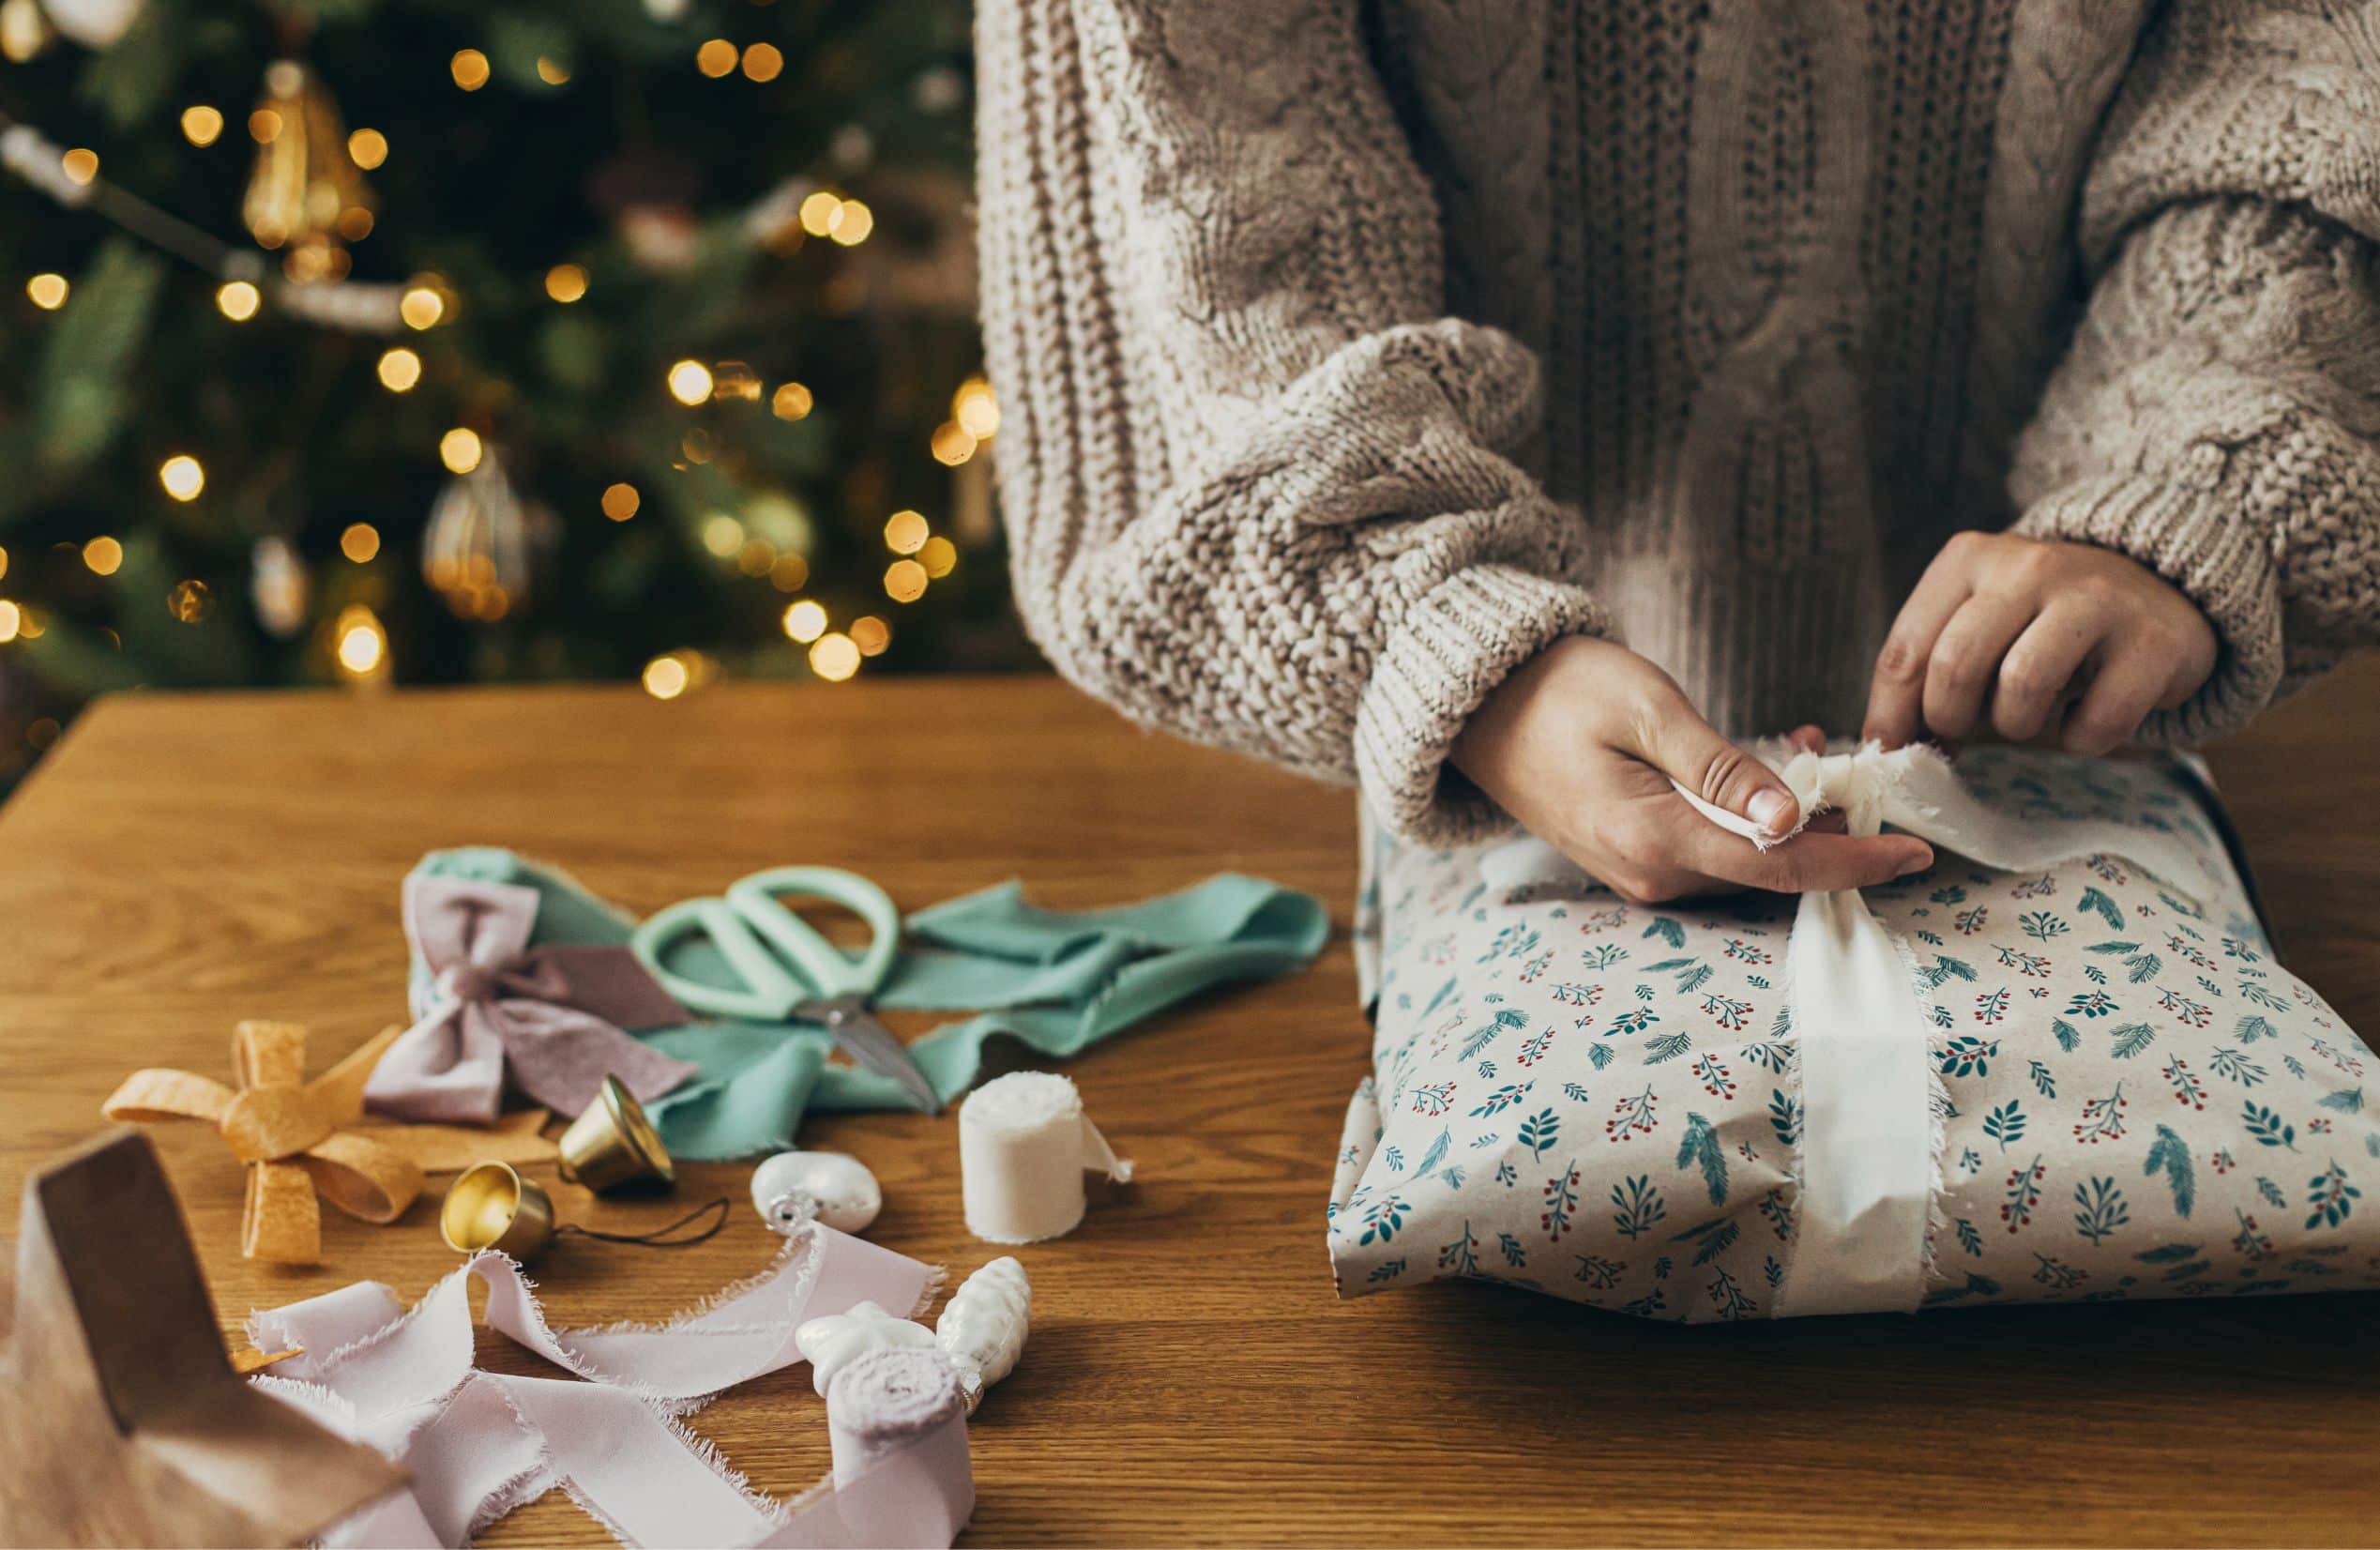 Wrapping gifts in the first holiday season in recovery